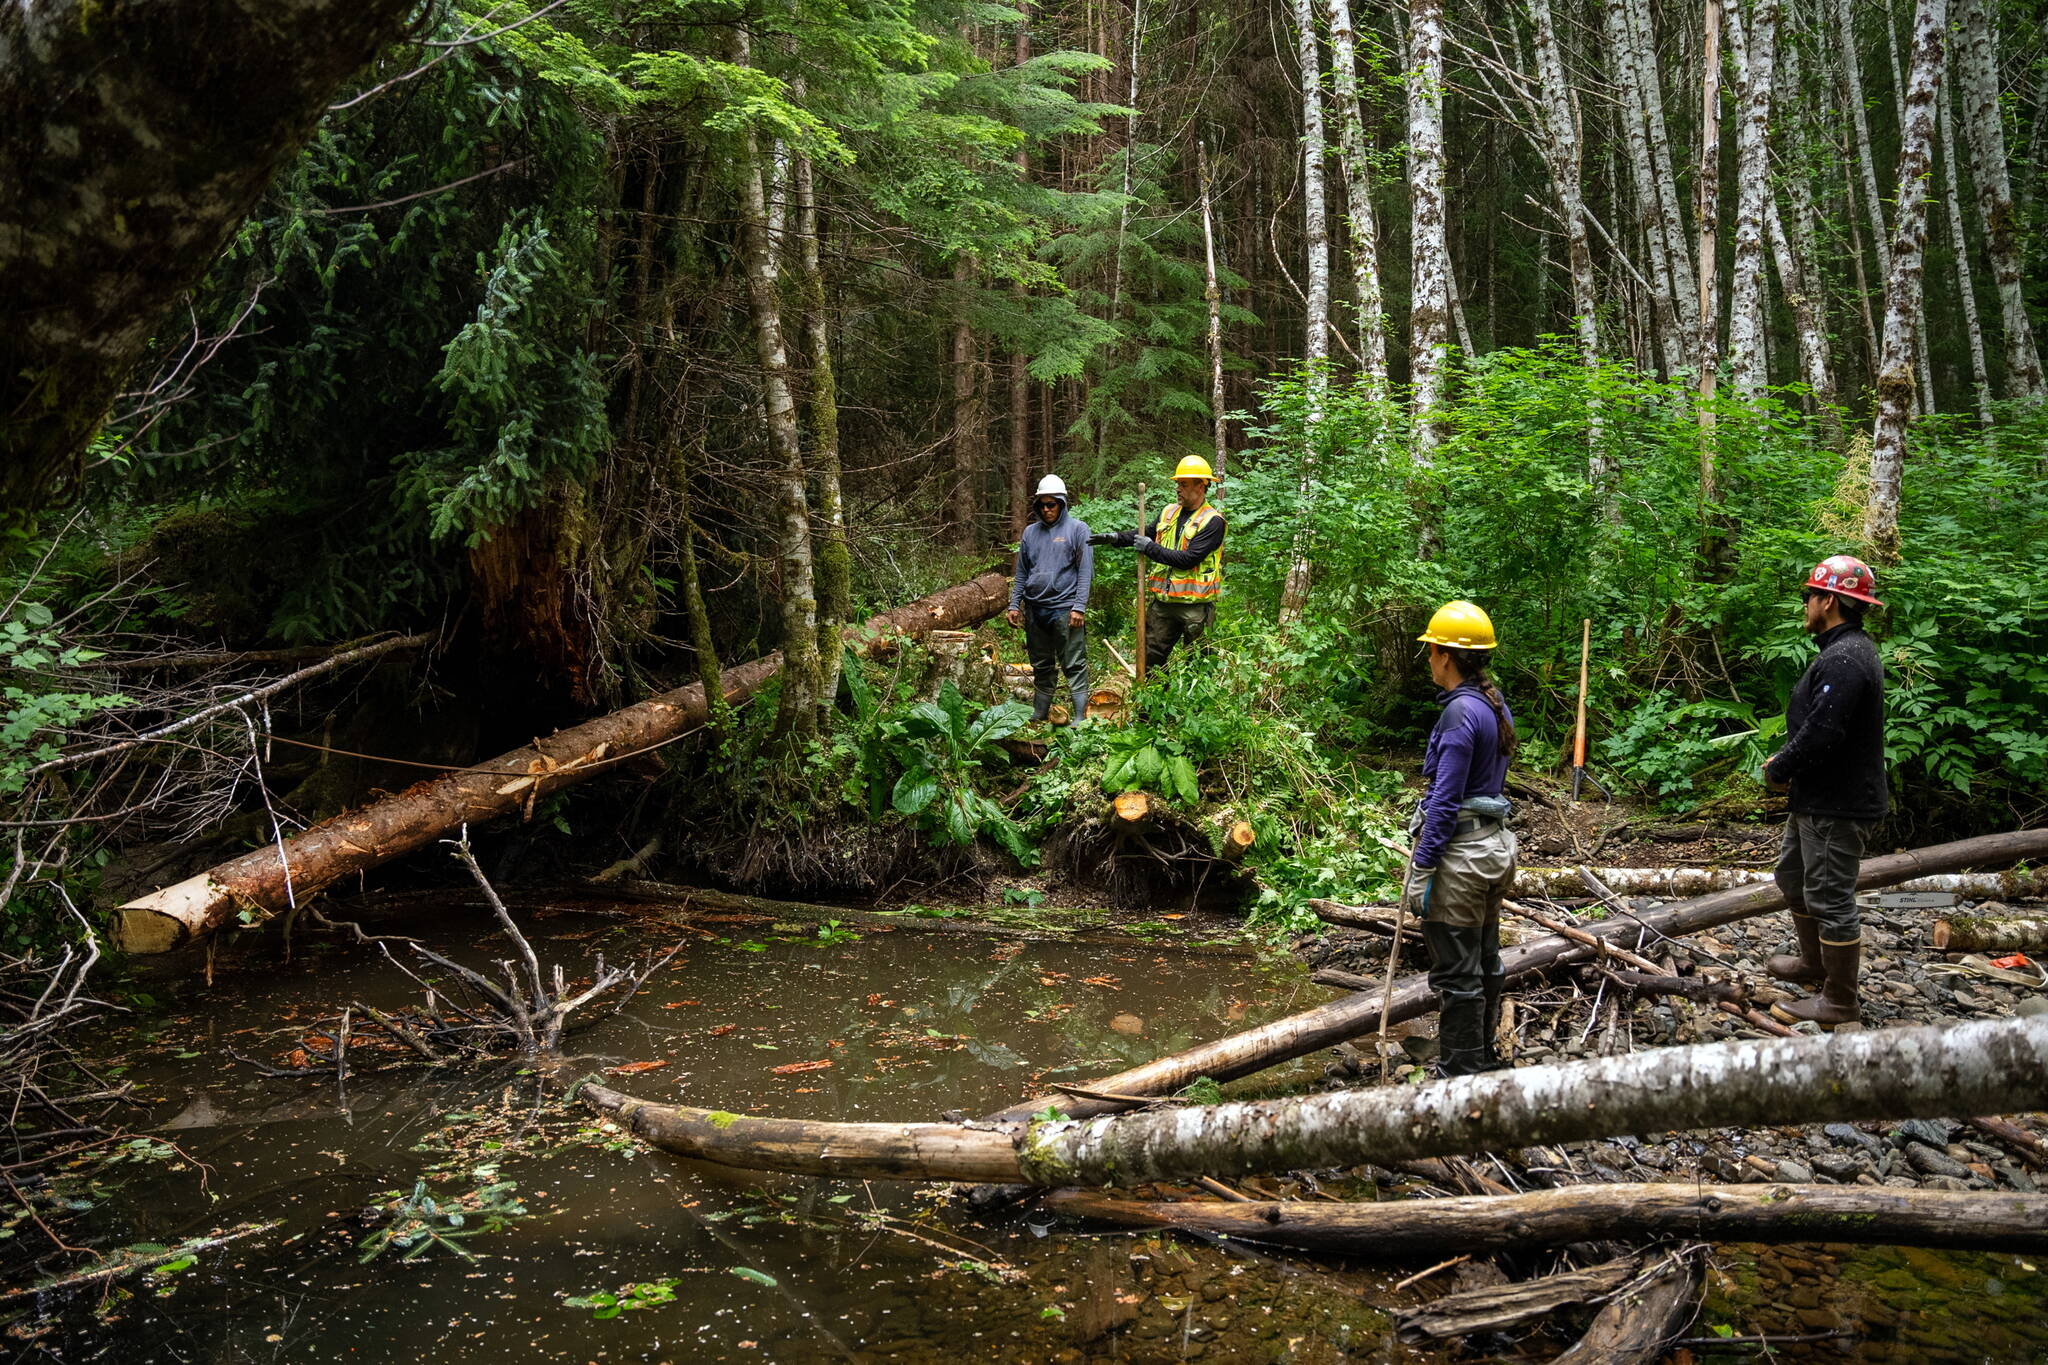 From left to right, Robert Hughes (KKCFP), Eric Castro (USFS), Kelsey Dean (SAWC) and Angelo Lerma (KKCFP) pause to assess the placement of a log into Shorty Creek on Kuiu Island. Adding wood to streams helps build salmon habitat, and adds flood-resilient structure to the stream and banks. (Photo by Lee House)